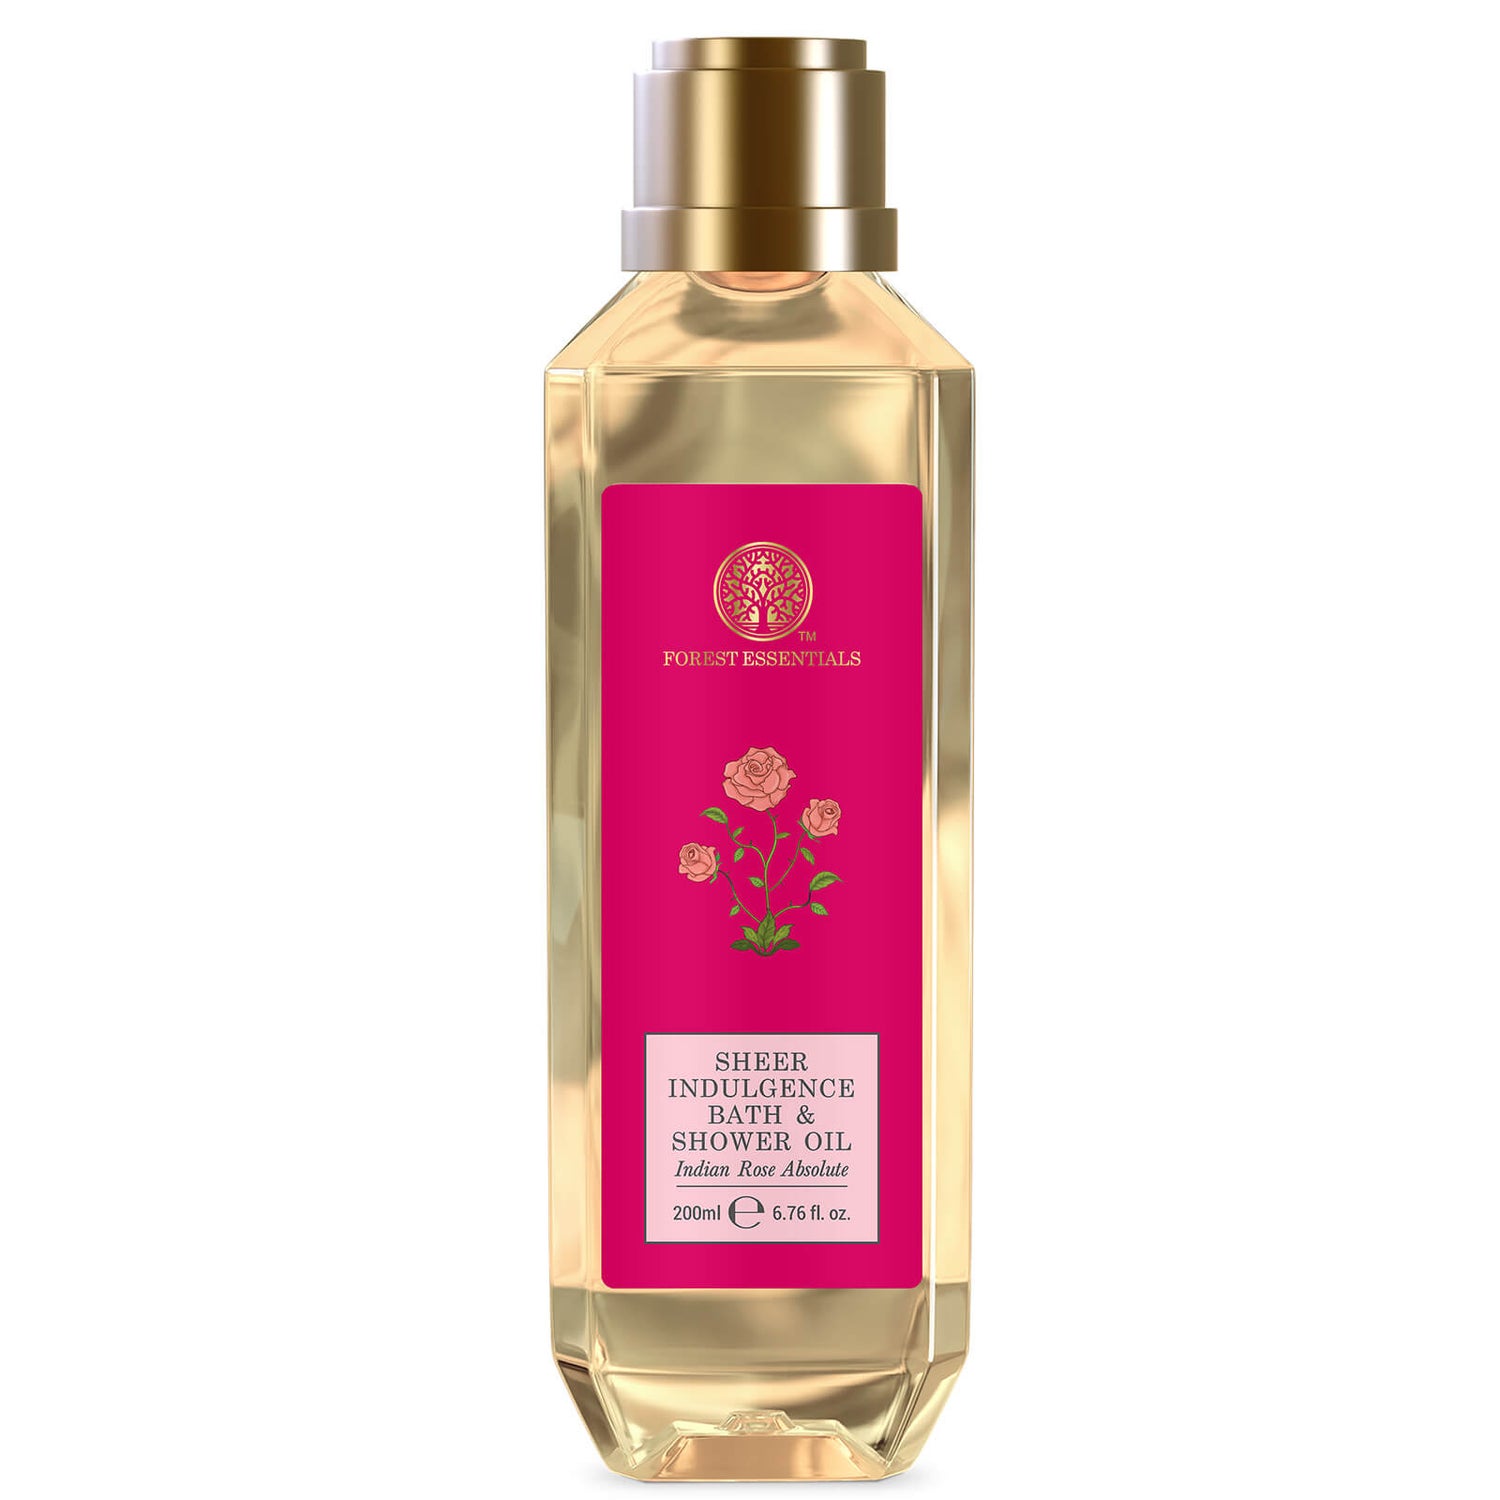 Forest Essentials Sheer Indulgence Bath and Shower Oil Indian Rose Absolute (Various Sizes)